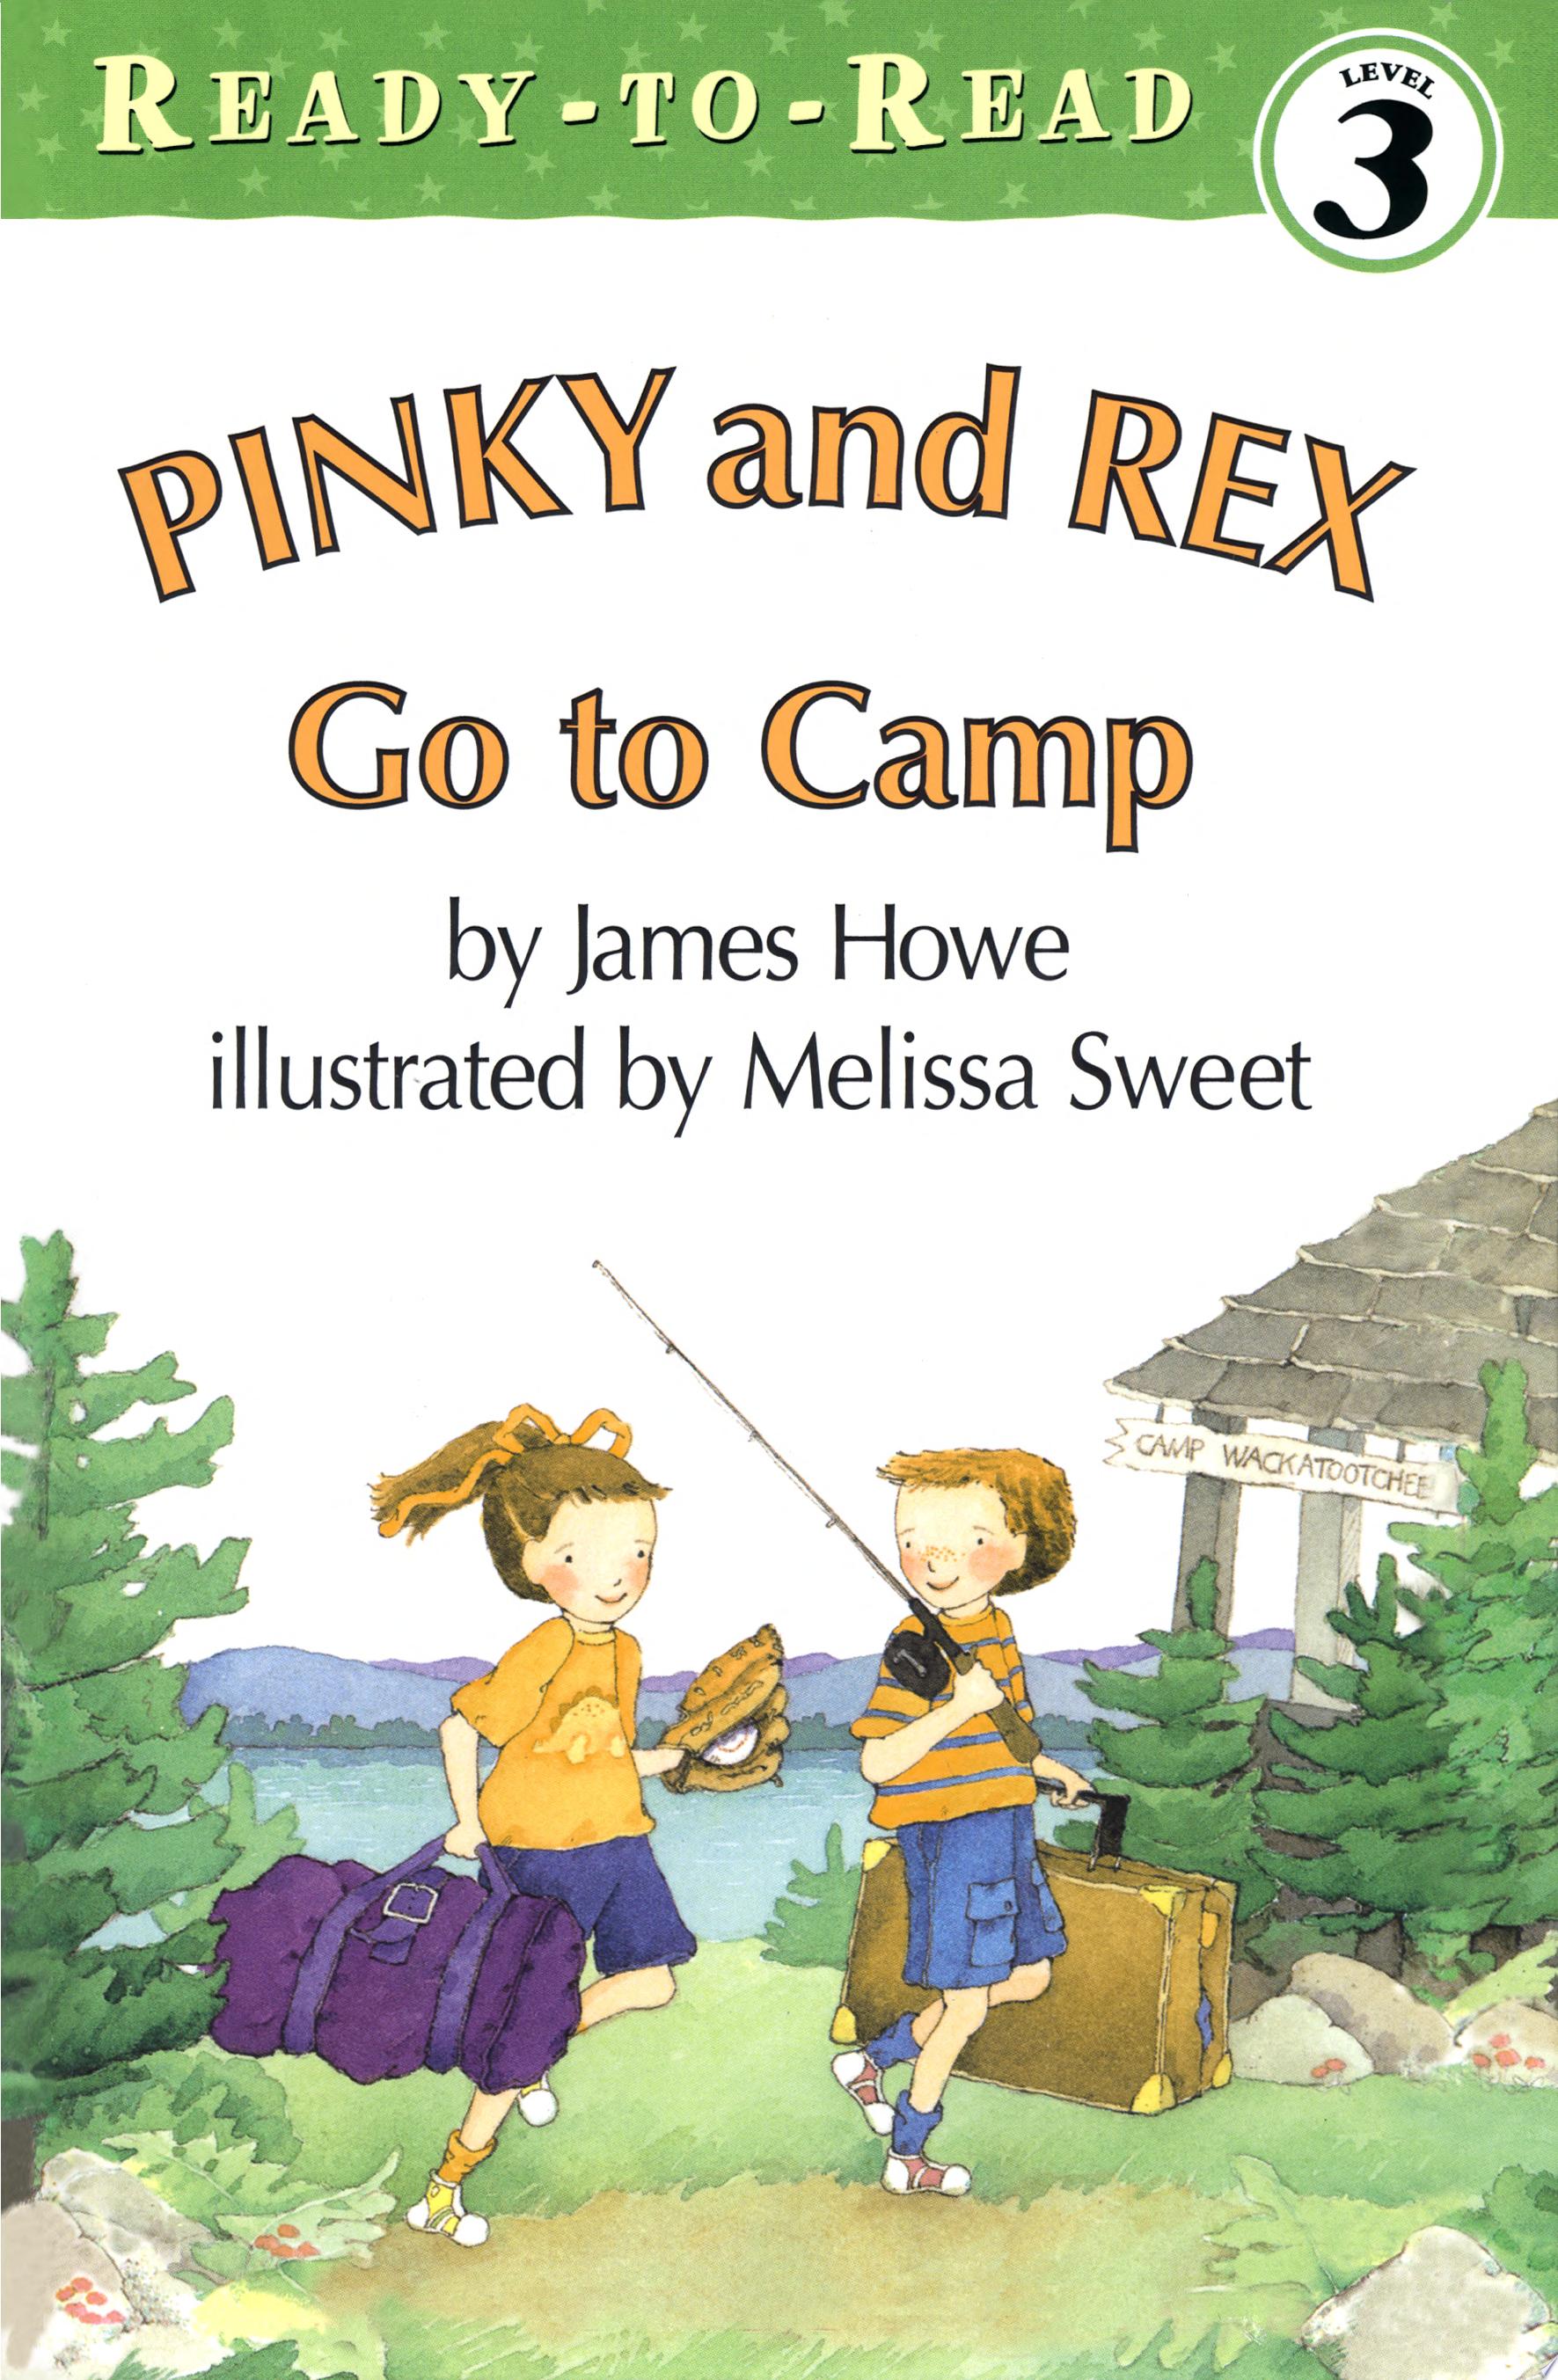 Image for "Pinky and Rex Go to Camp"